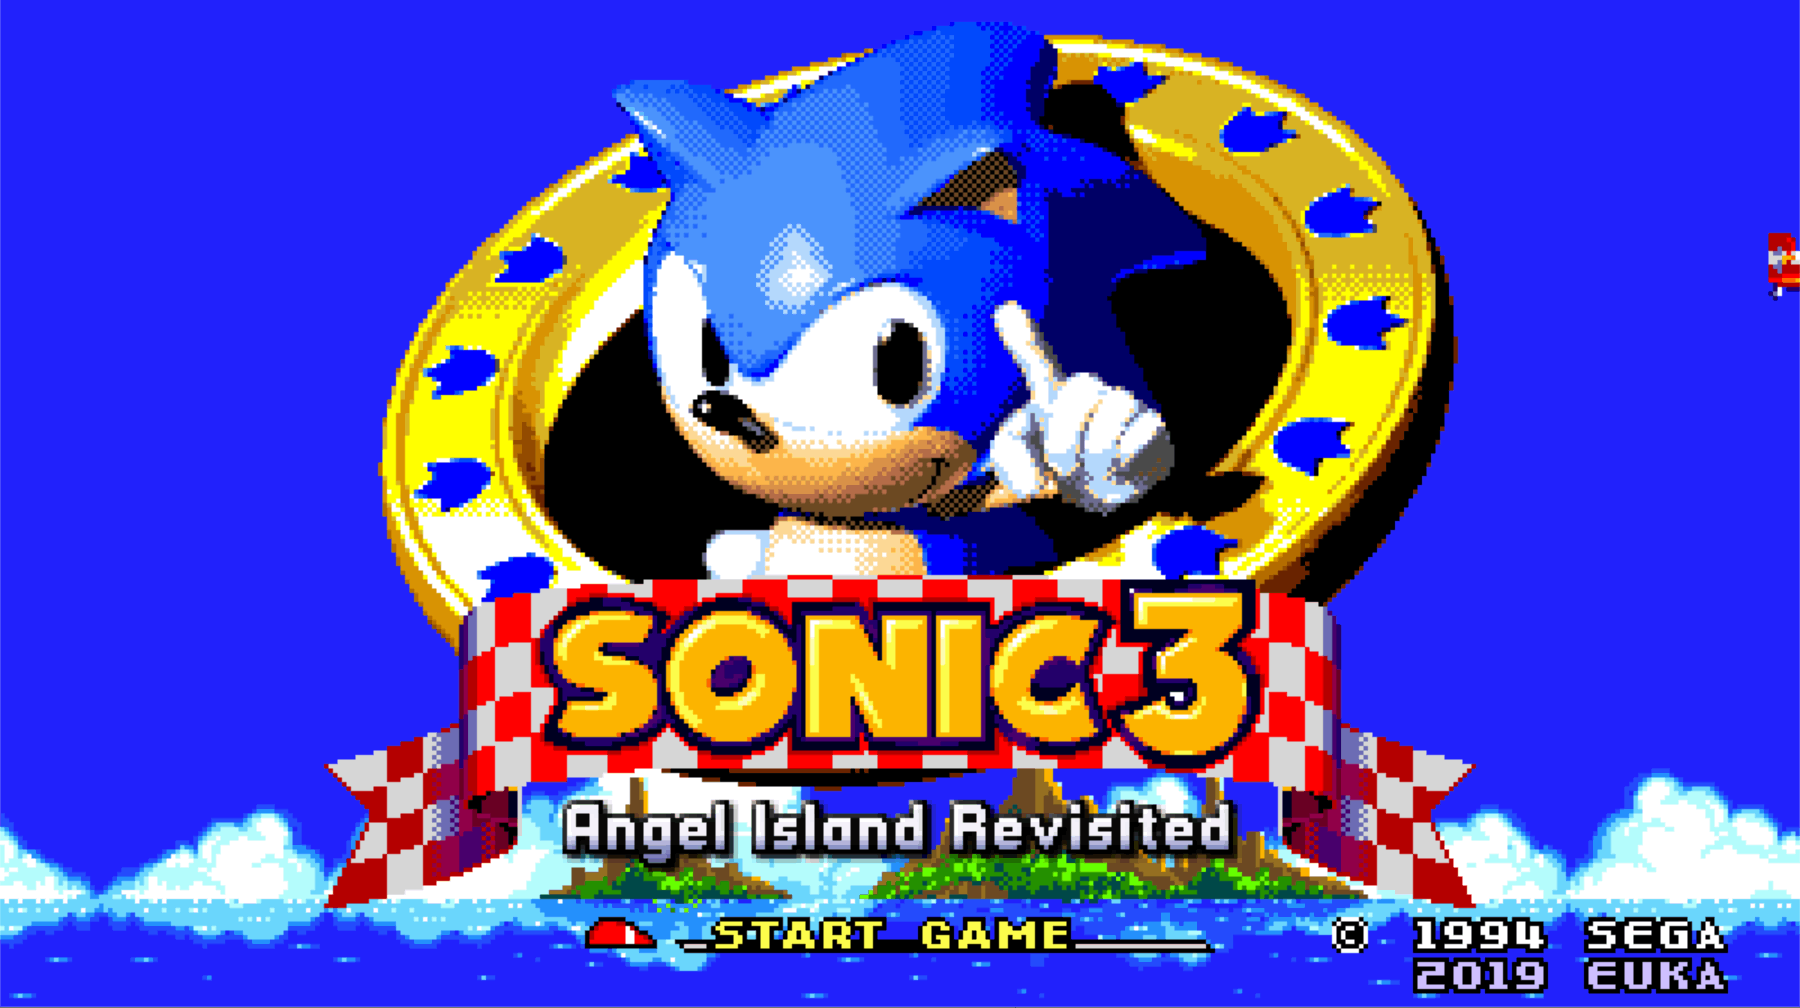 Image for Sonic 3 A.I.R. is the quality remaster that Sega probably won't release itself